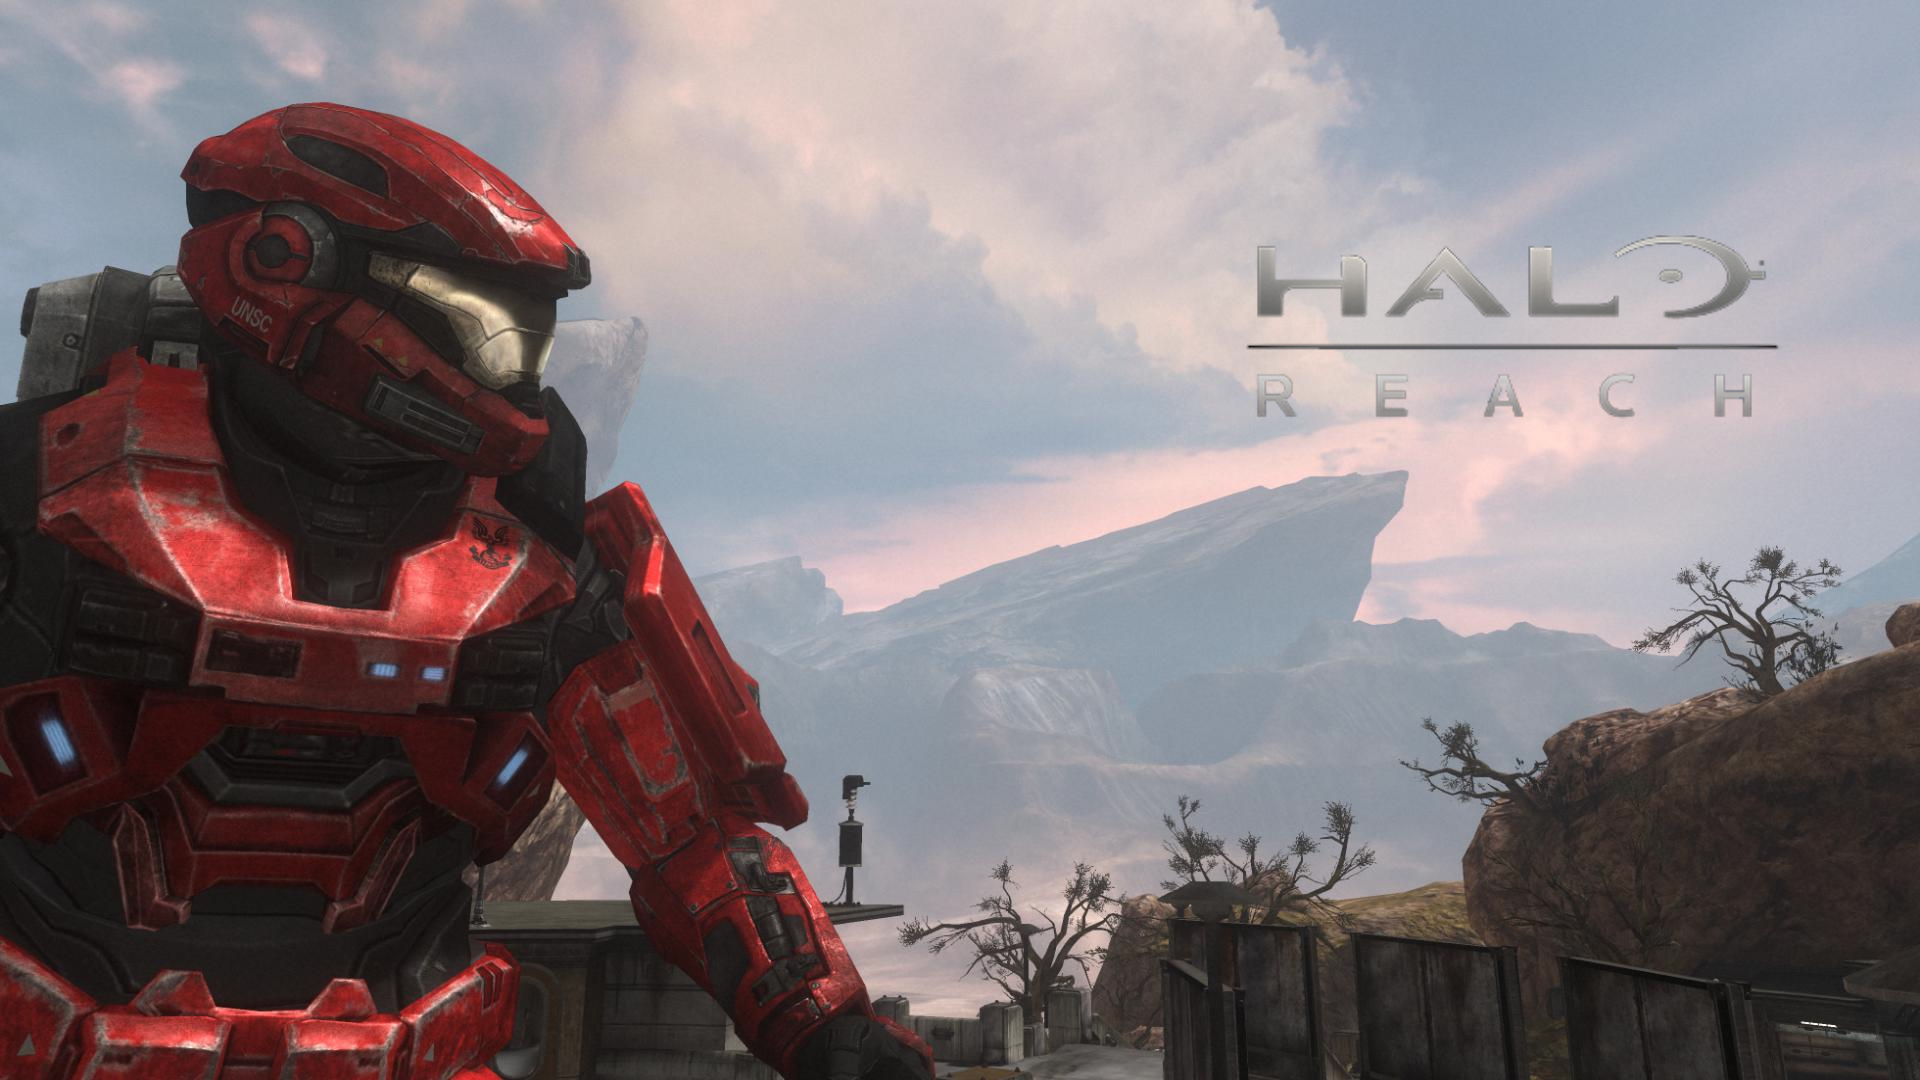 Halo Reach Wallpapers Free Download